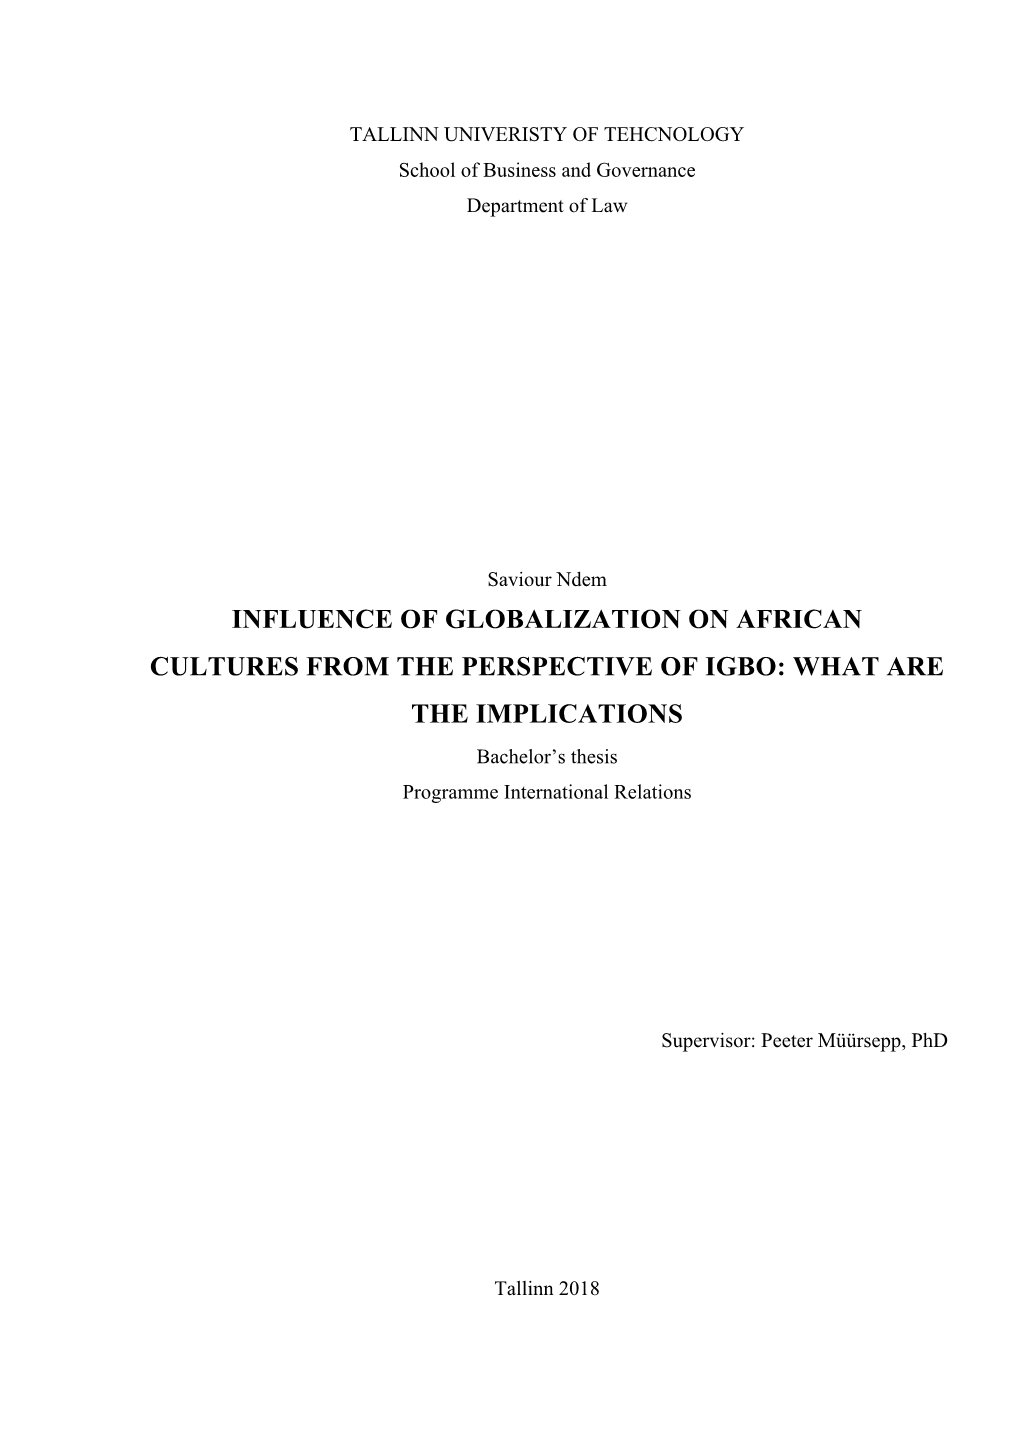 INFLUENCE of GLOBALIZATION on AFRICAN CULTURES from the PERSPECTIVE of IGBO: WHAT ARE the IMPLICATIONS Bachelor’S Thesis Programme International Relations